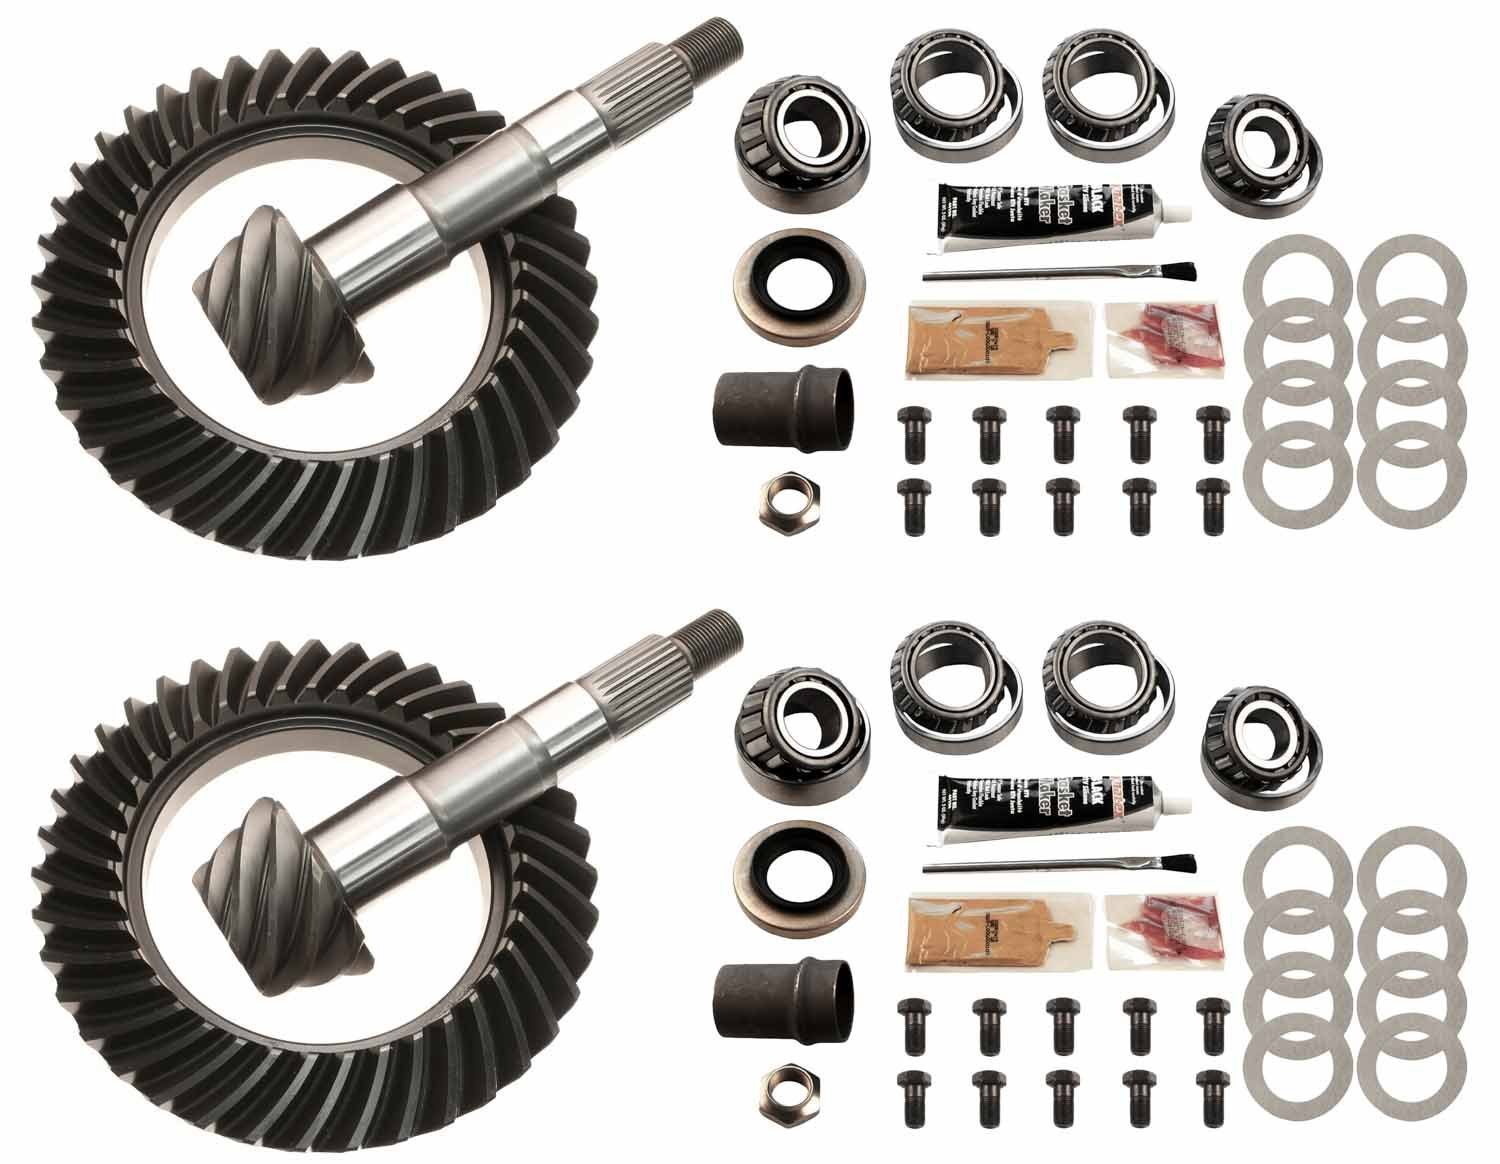 Complete Front and Rear Ring and Pinion Kit 1979-1985 Toyota Pickup 4-Cylinder, 1984-1985 Toyota 4Runner 4-Cylinder - 4.11 Ratio